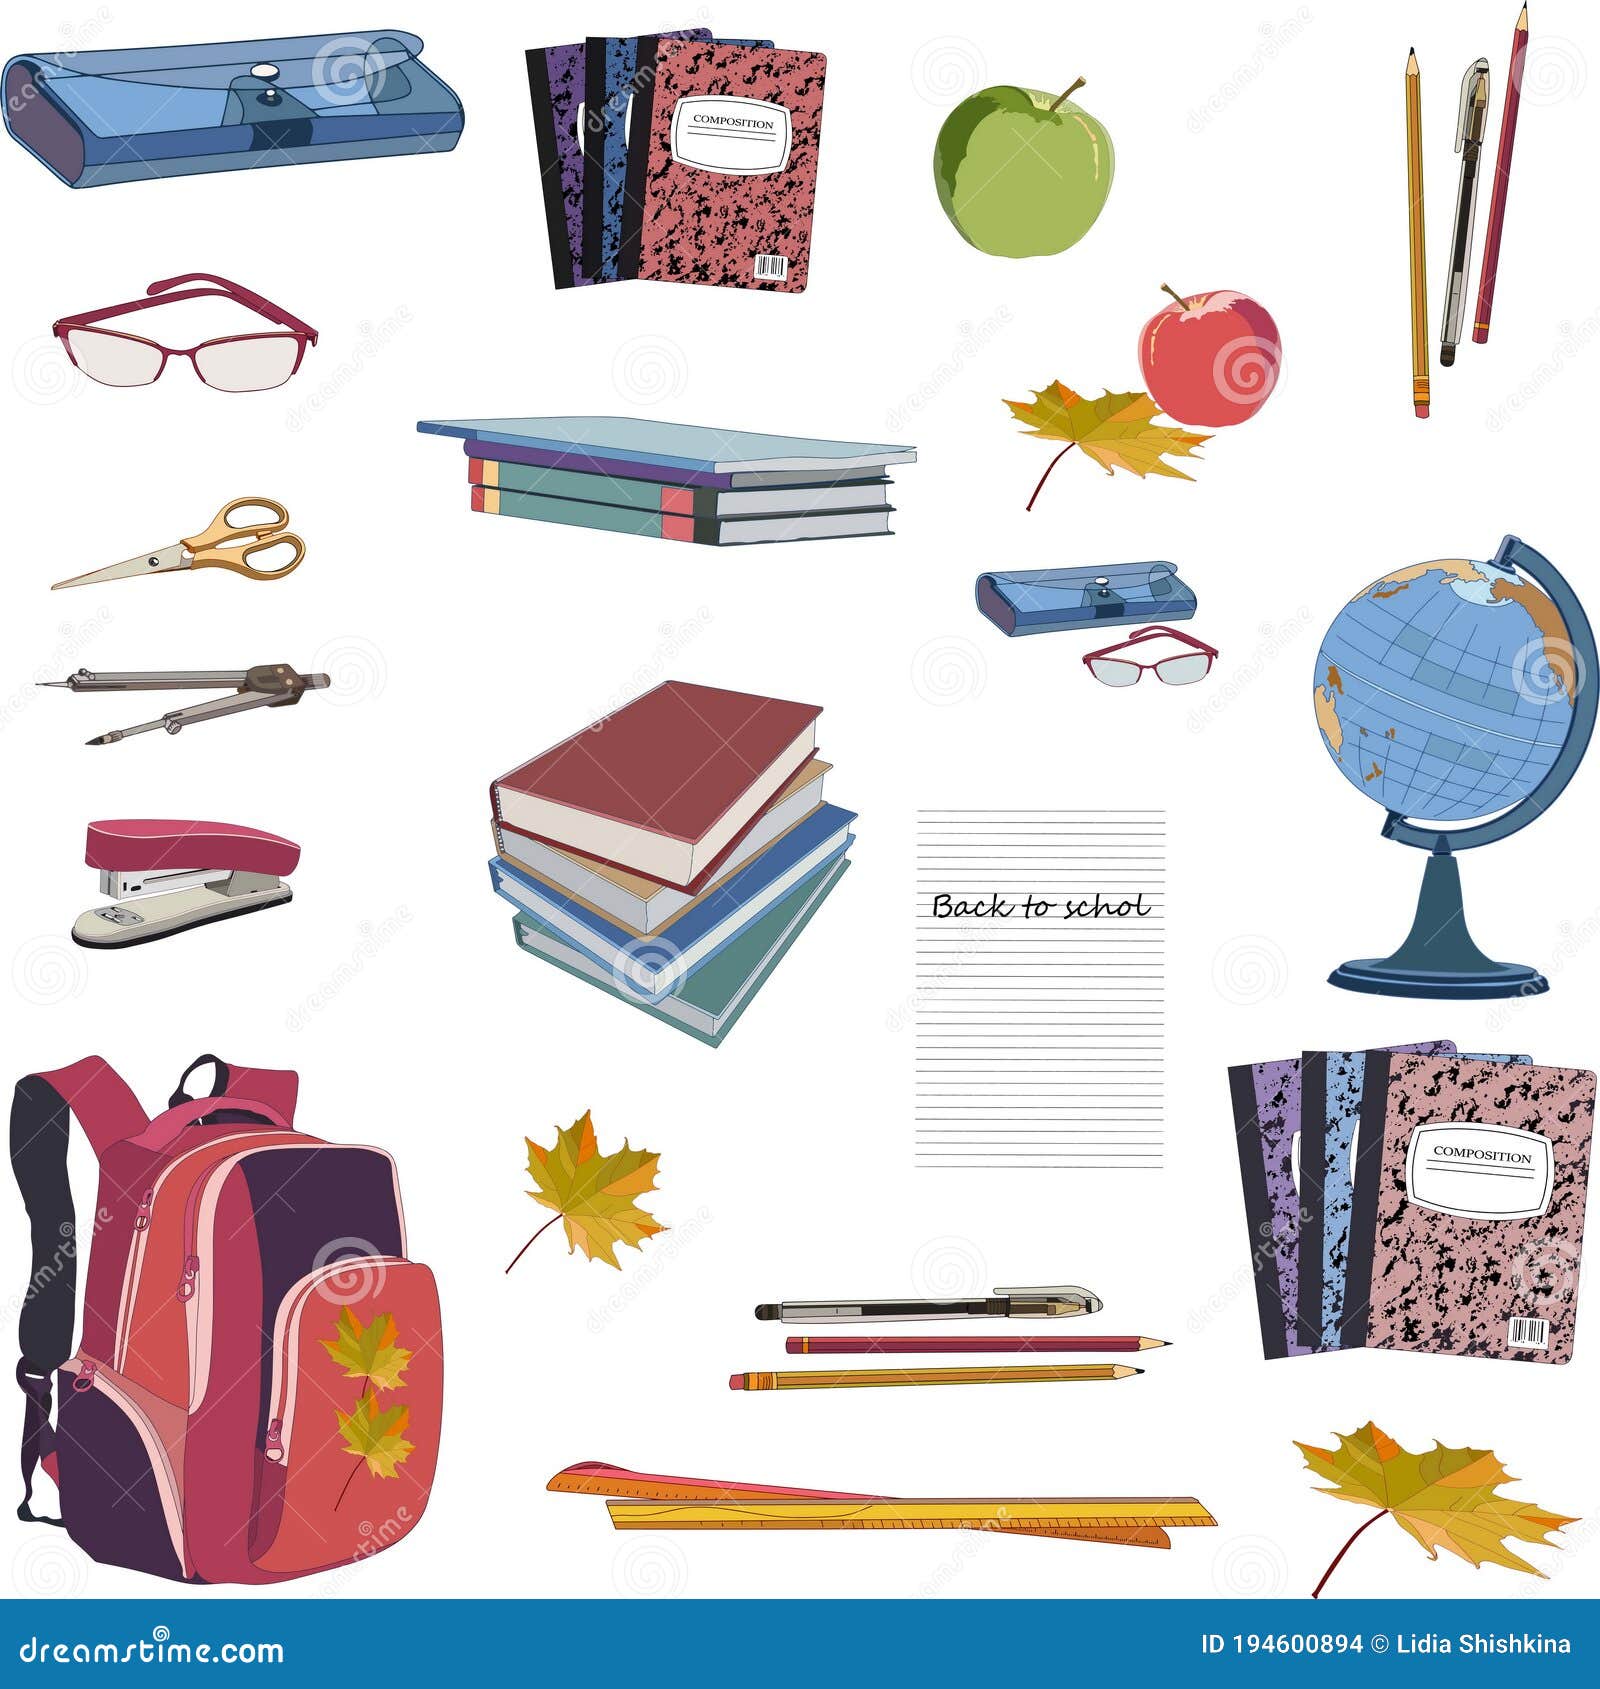 back to school.  collection of school supplies.  on a white background.